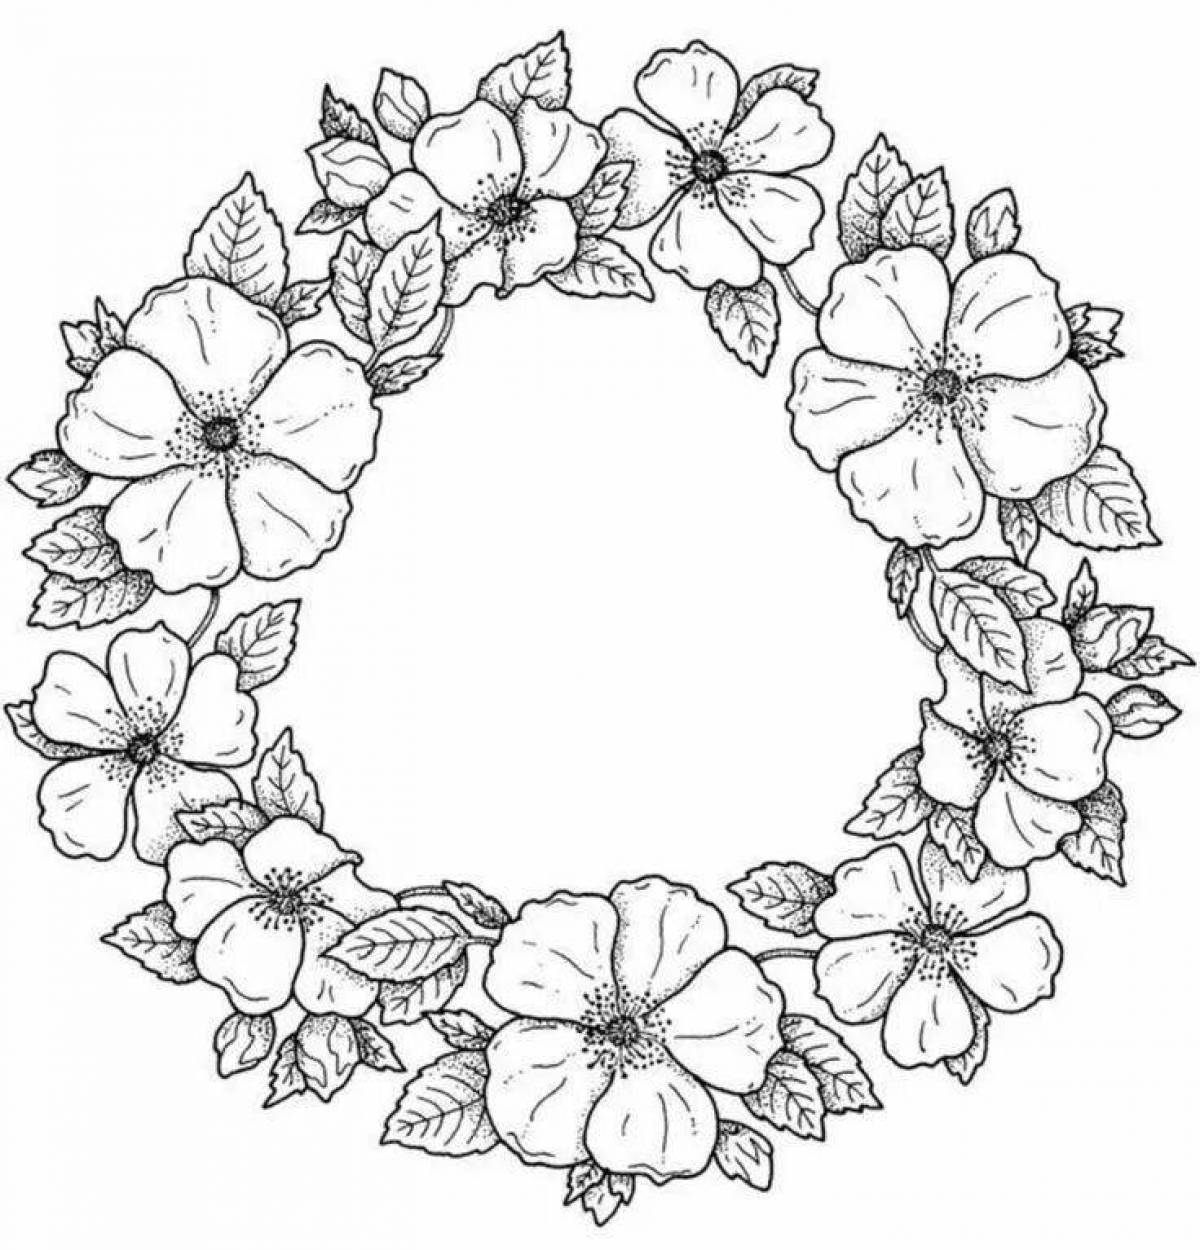 Charming wreath coloring page